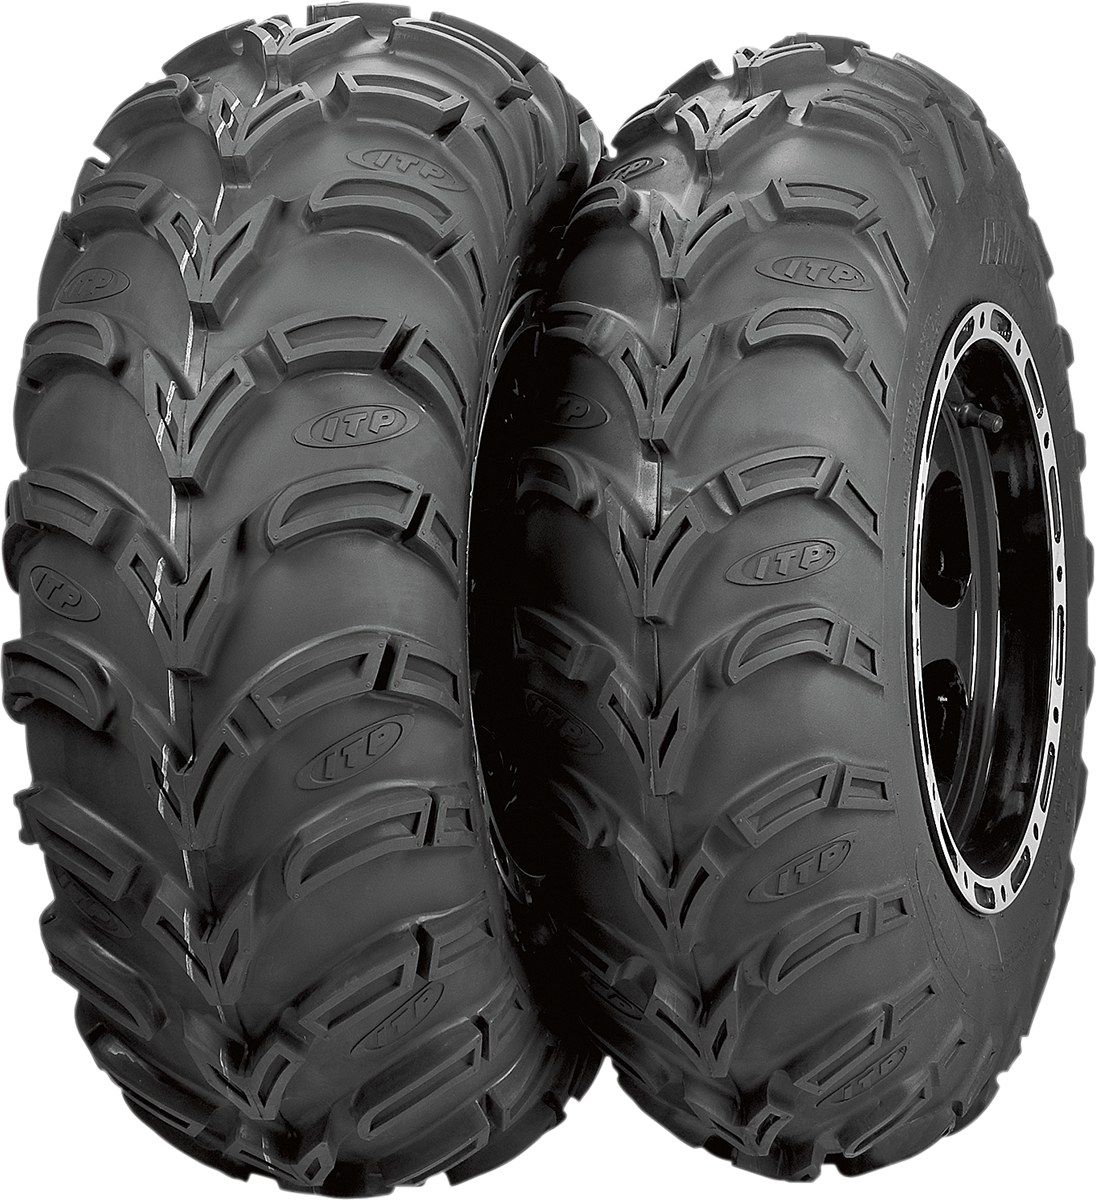 ITP Tire - Mud Lite XL - Front/Rear - 27x10-12 - 6 Ply 56A345